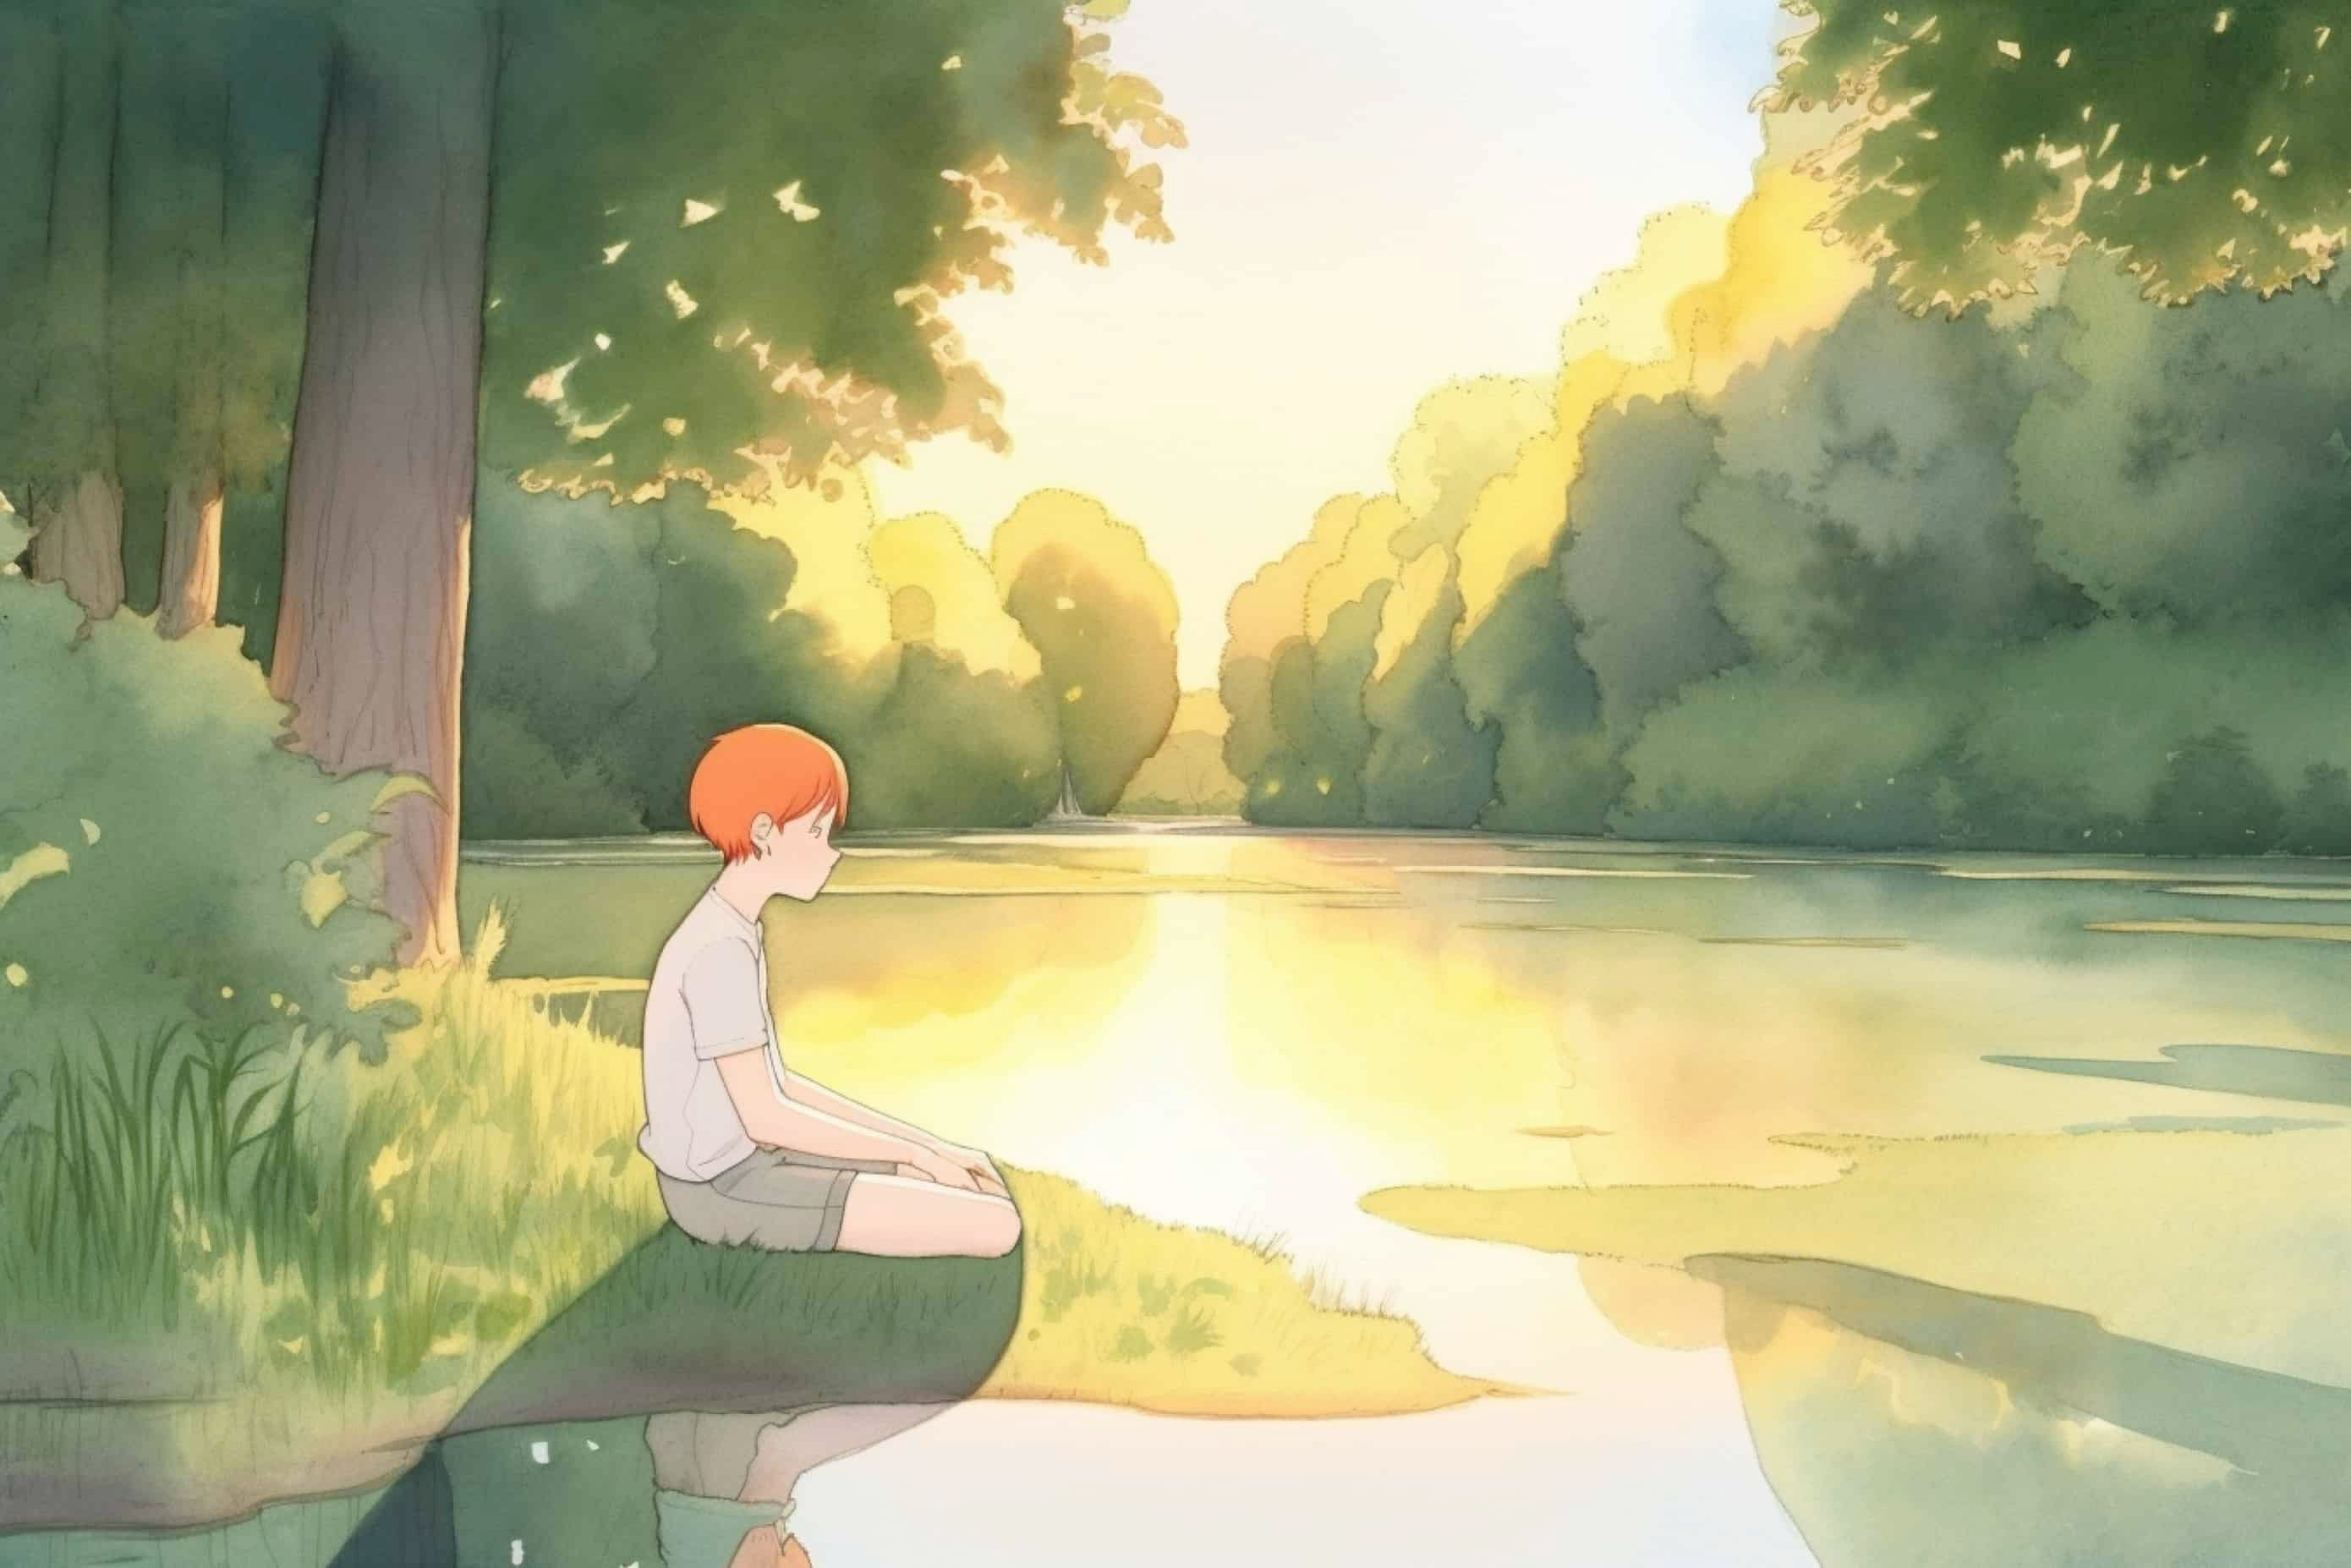 A serene individual sitting cross - legged near a tranquil lake, surrounded by lush trees and soft golden sunlight, emanating a sense of peace and calm.